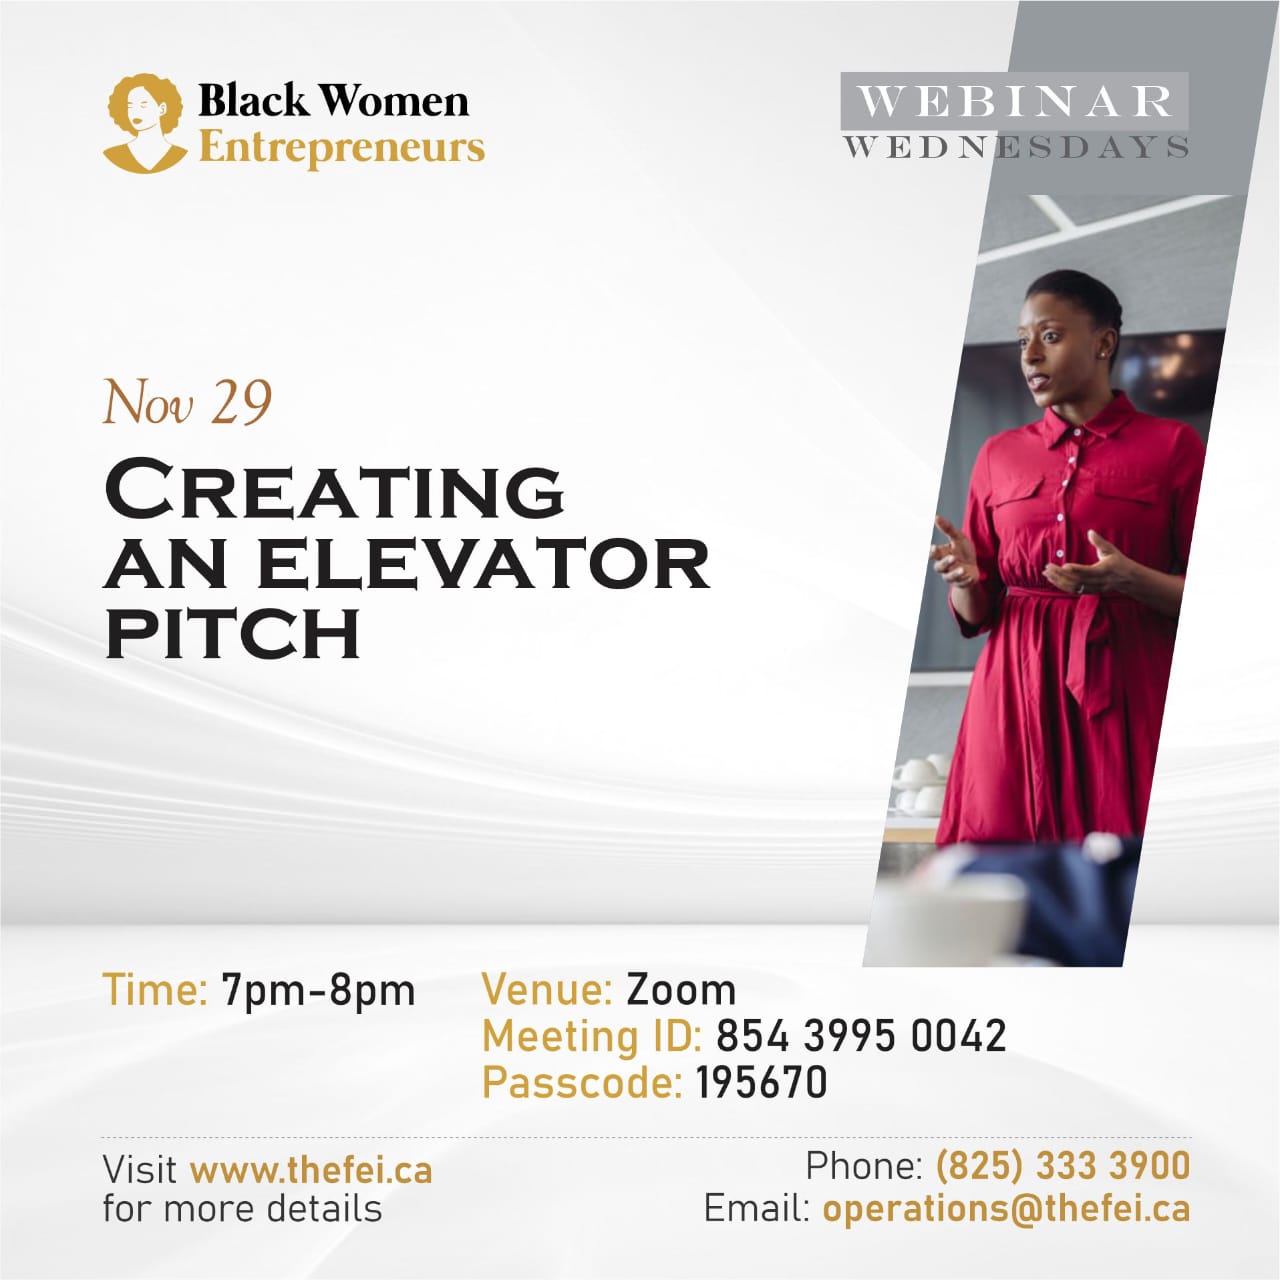 CREATING AN ELEVATOR PITCH